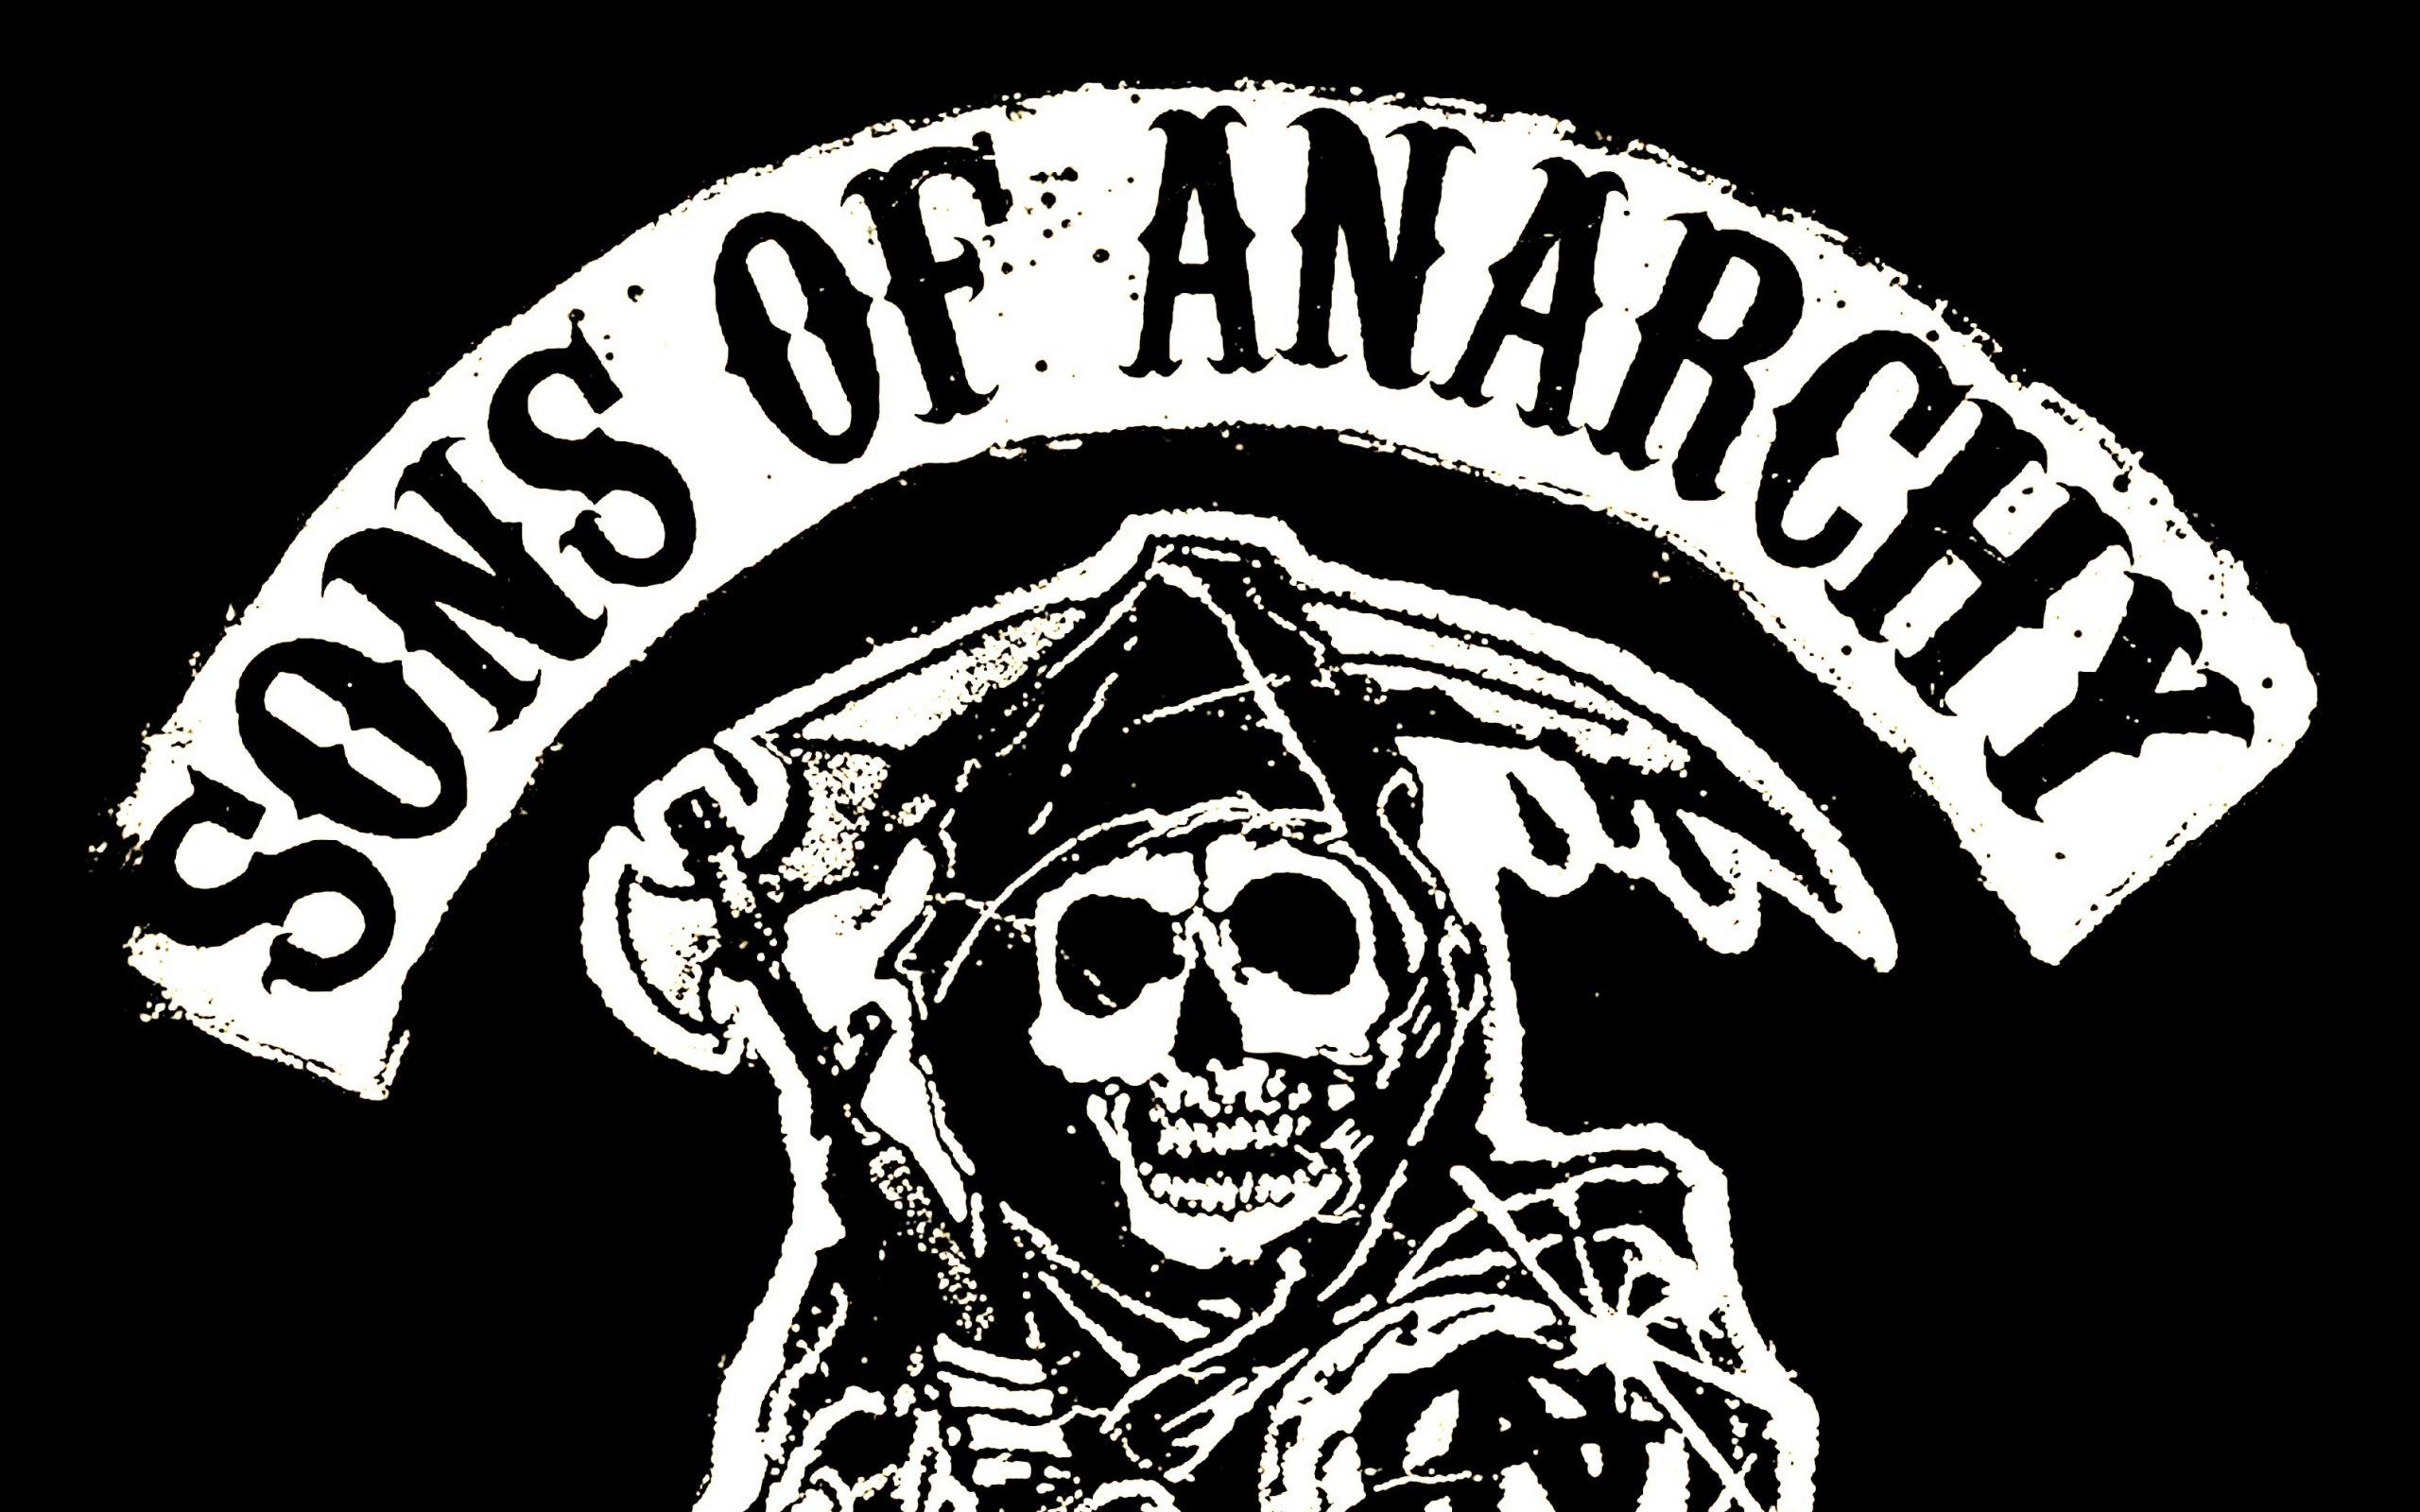 Discover more than 73 sons of anarchy logo latest - ceg.edu.vn